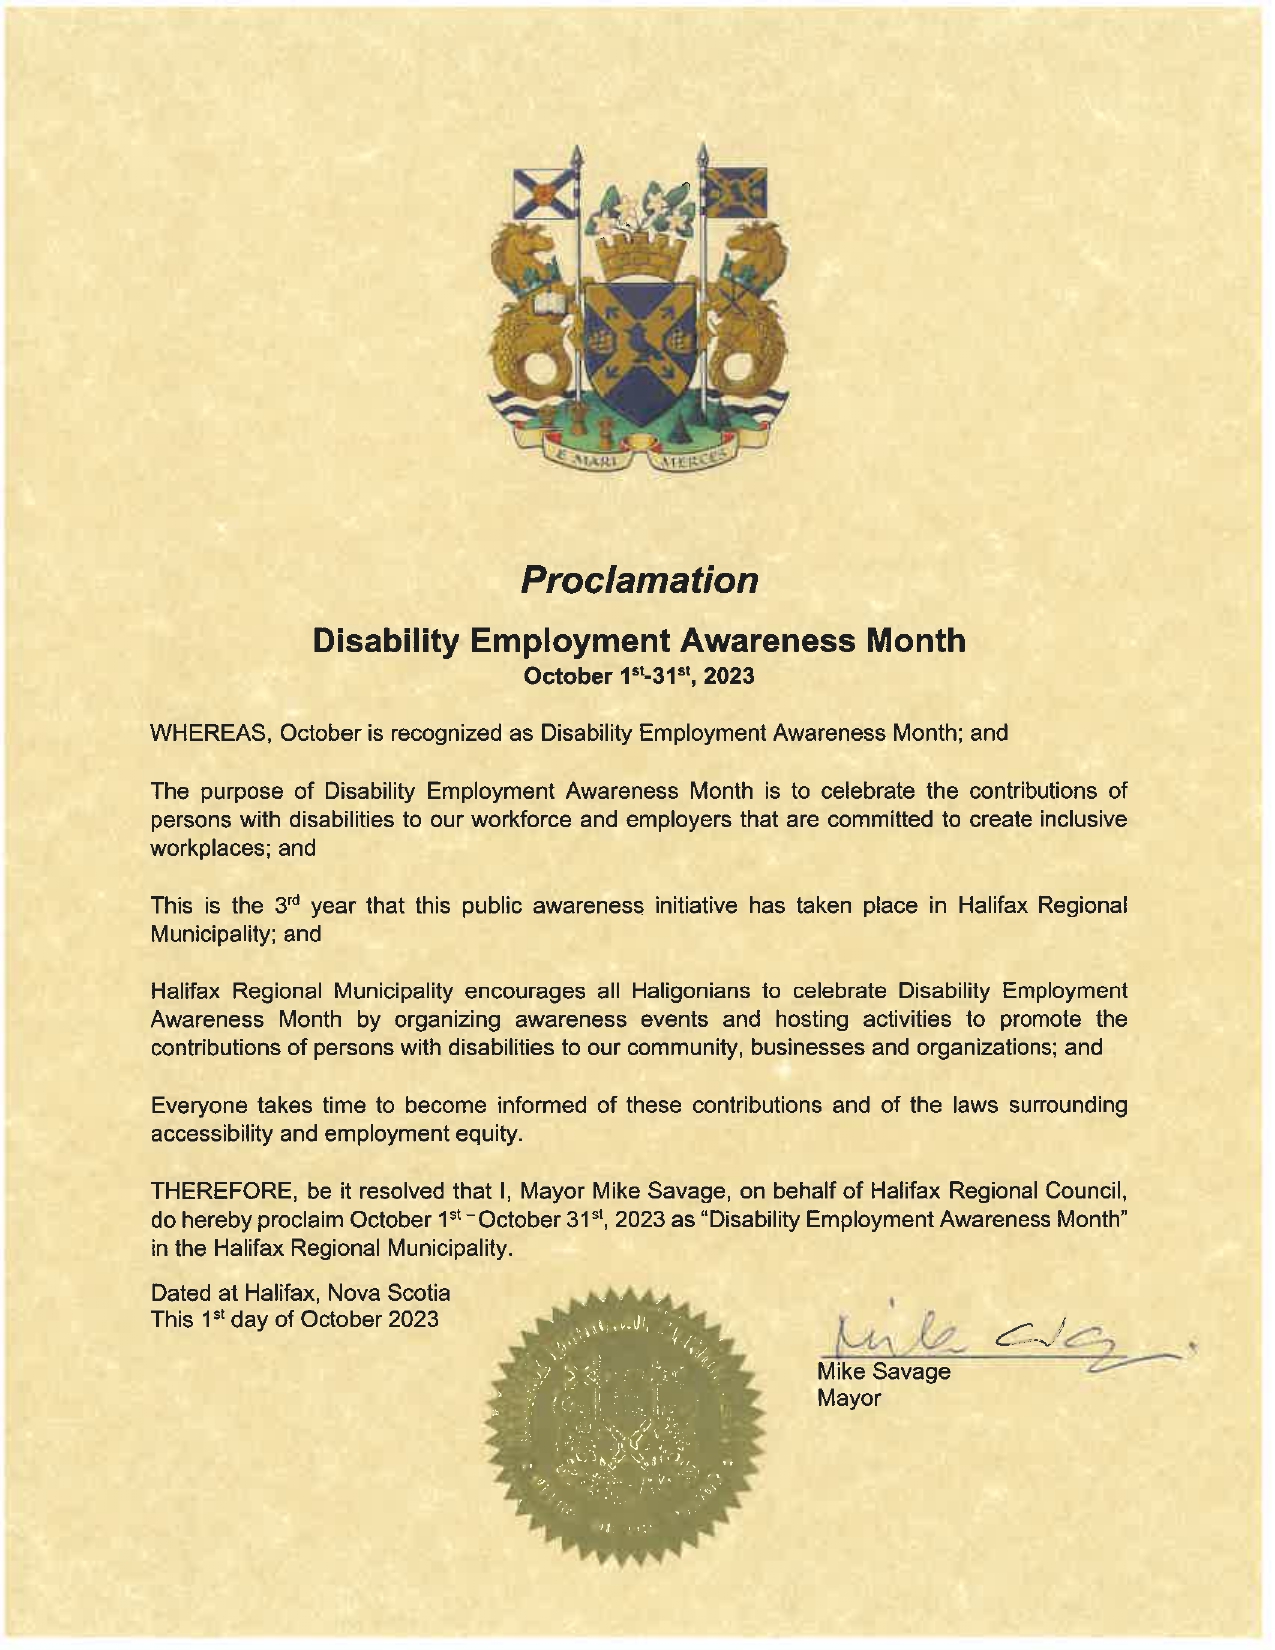 The official proclamation for Disability Employment Awareness Month